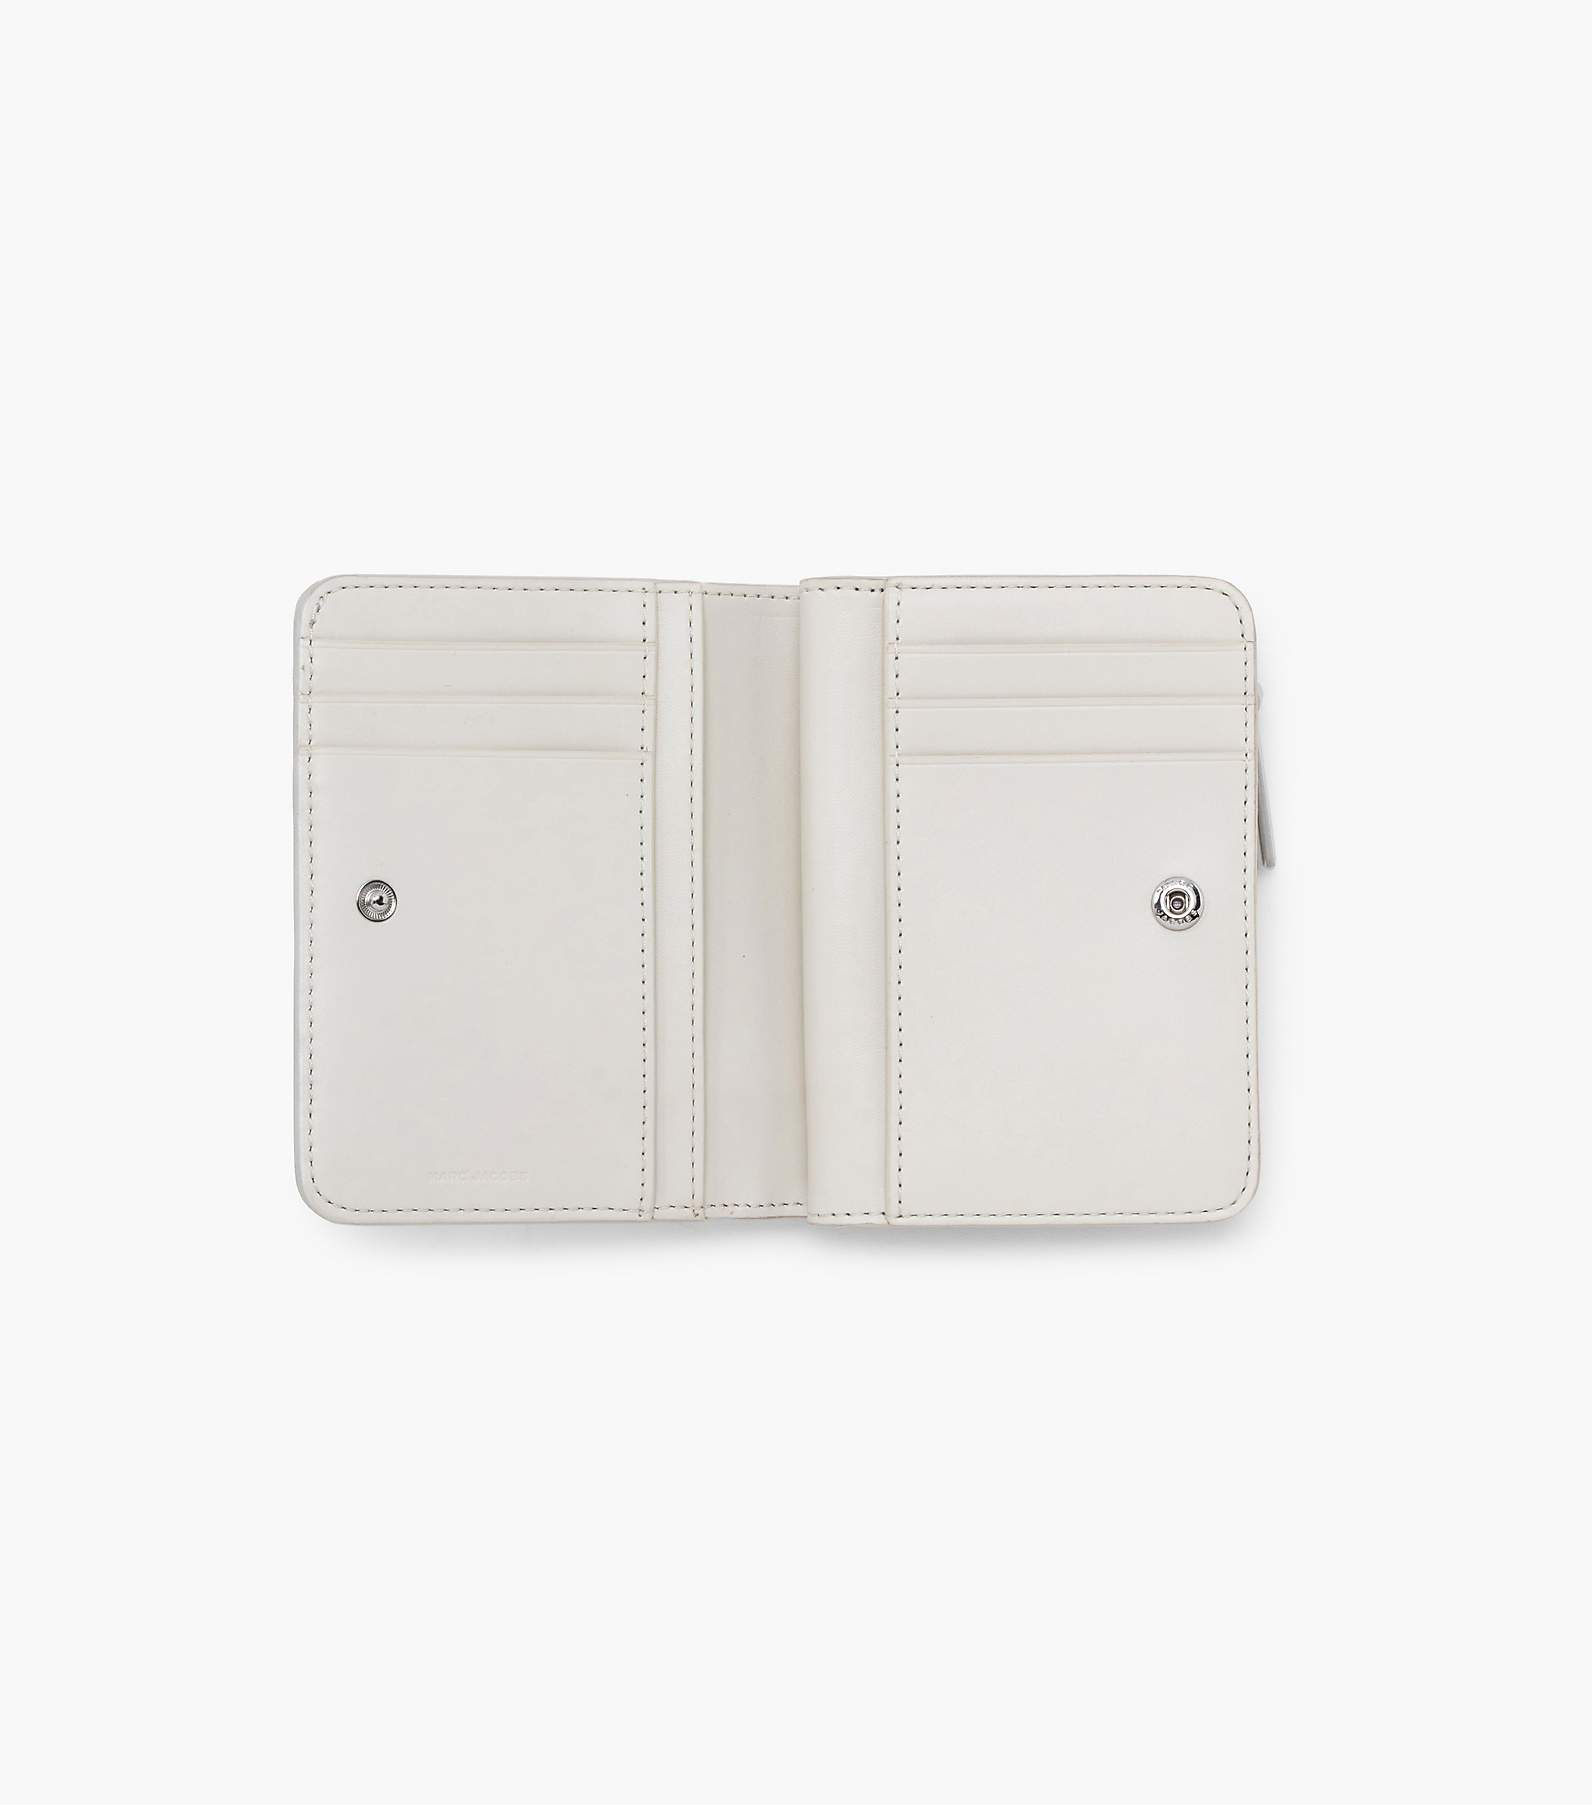 Nylon look alike Wallet- beautiful quality- box + dust bag included